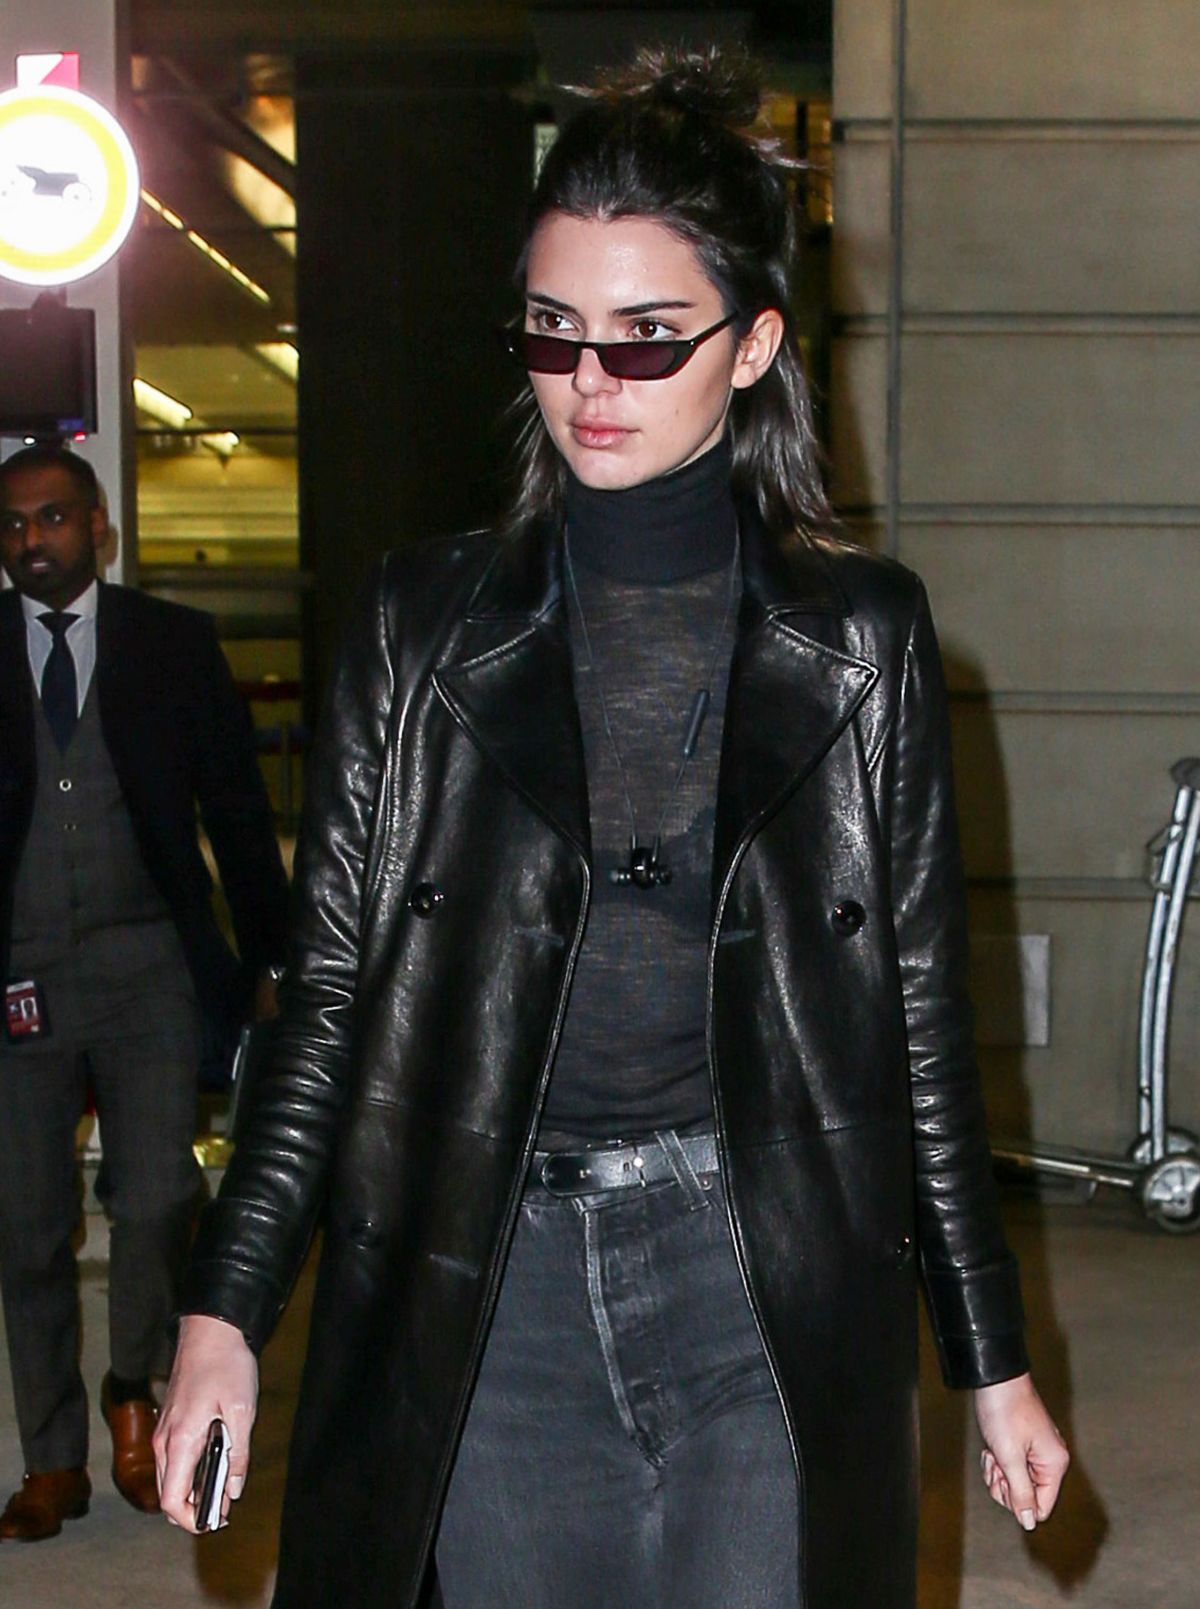 KENDALL JENNER at CDG Airport in Paris 02/27/2017 – HawtCelebs